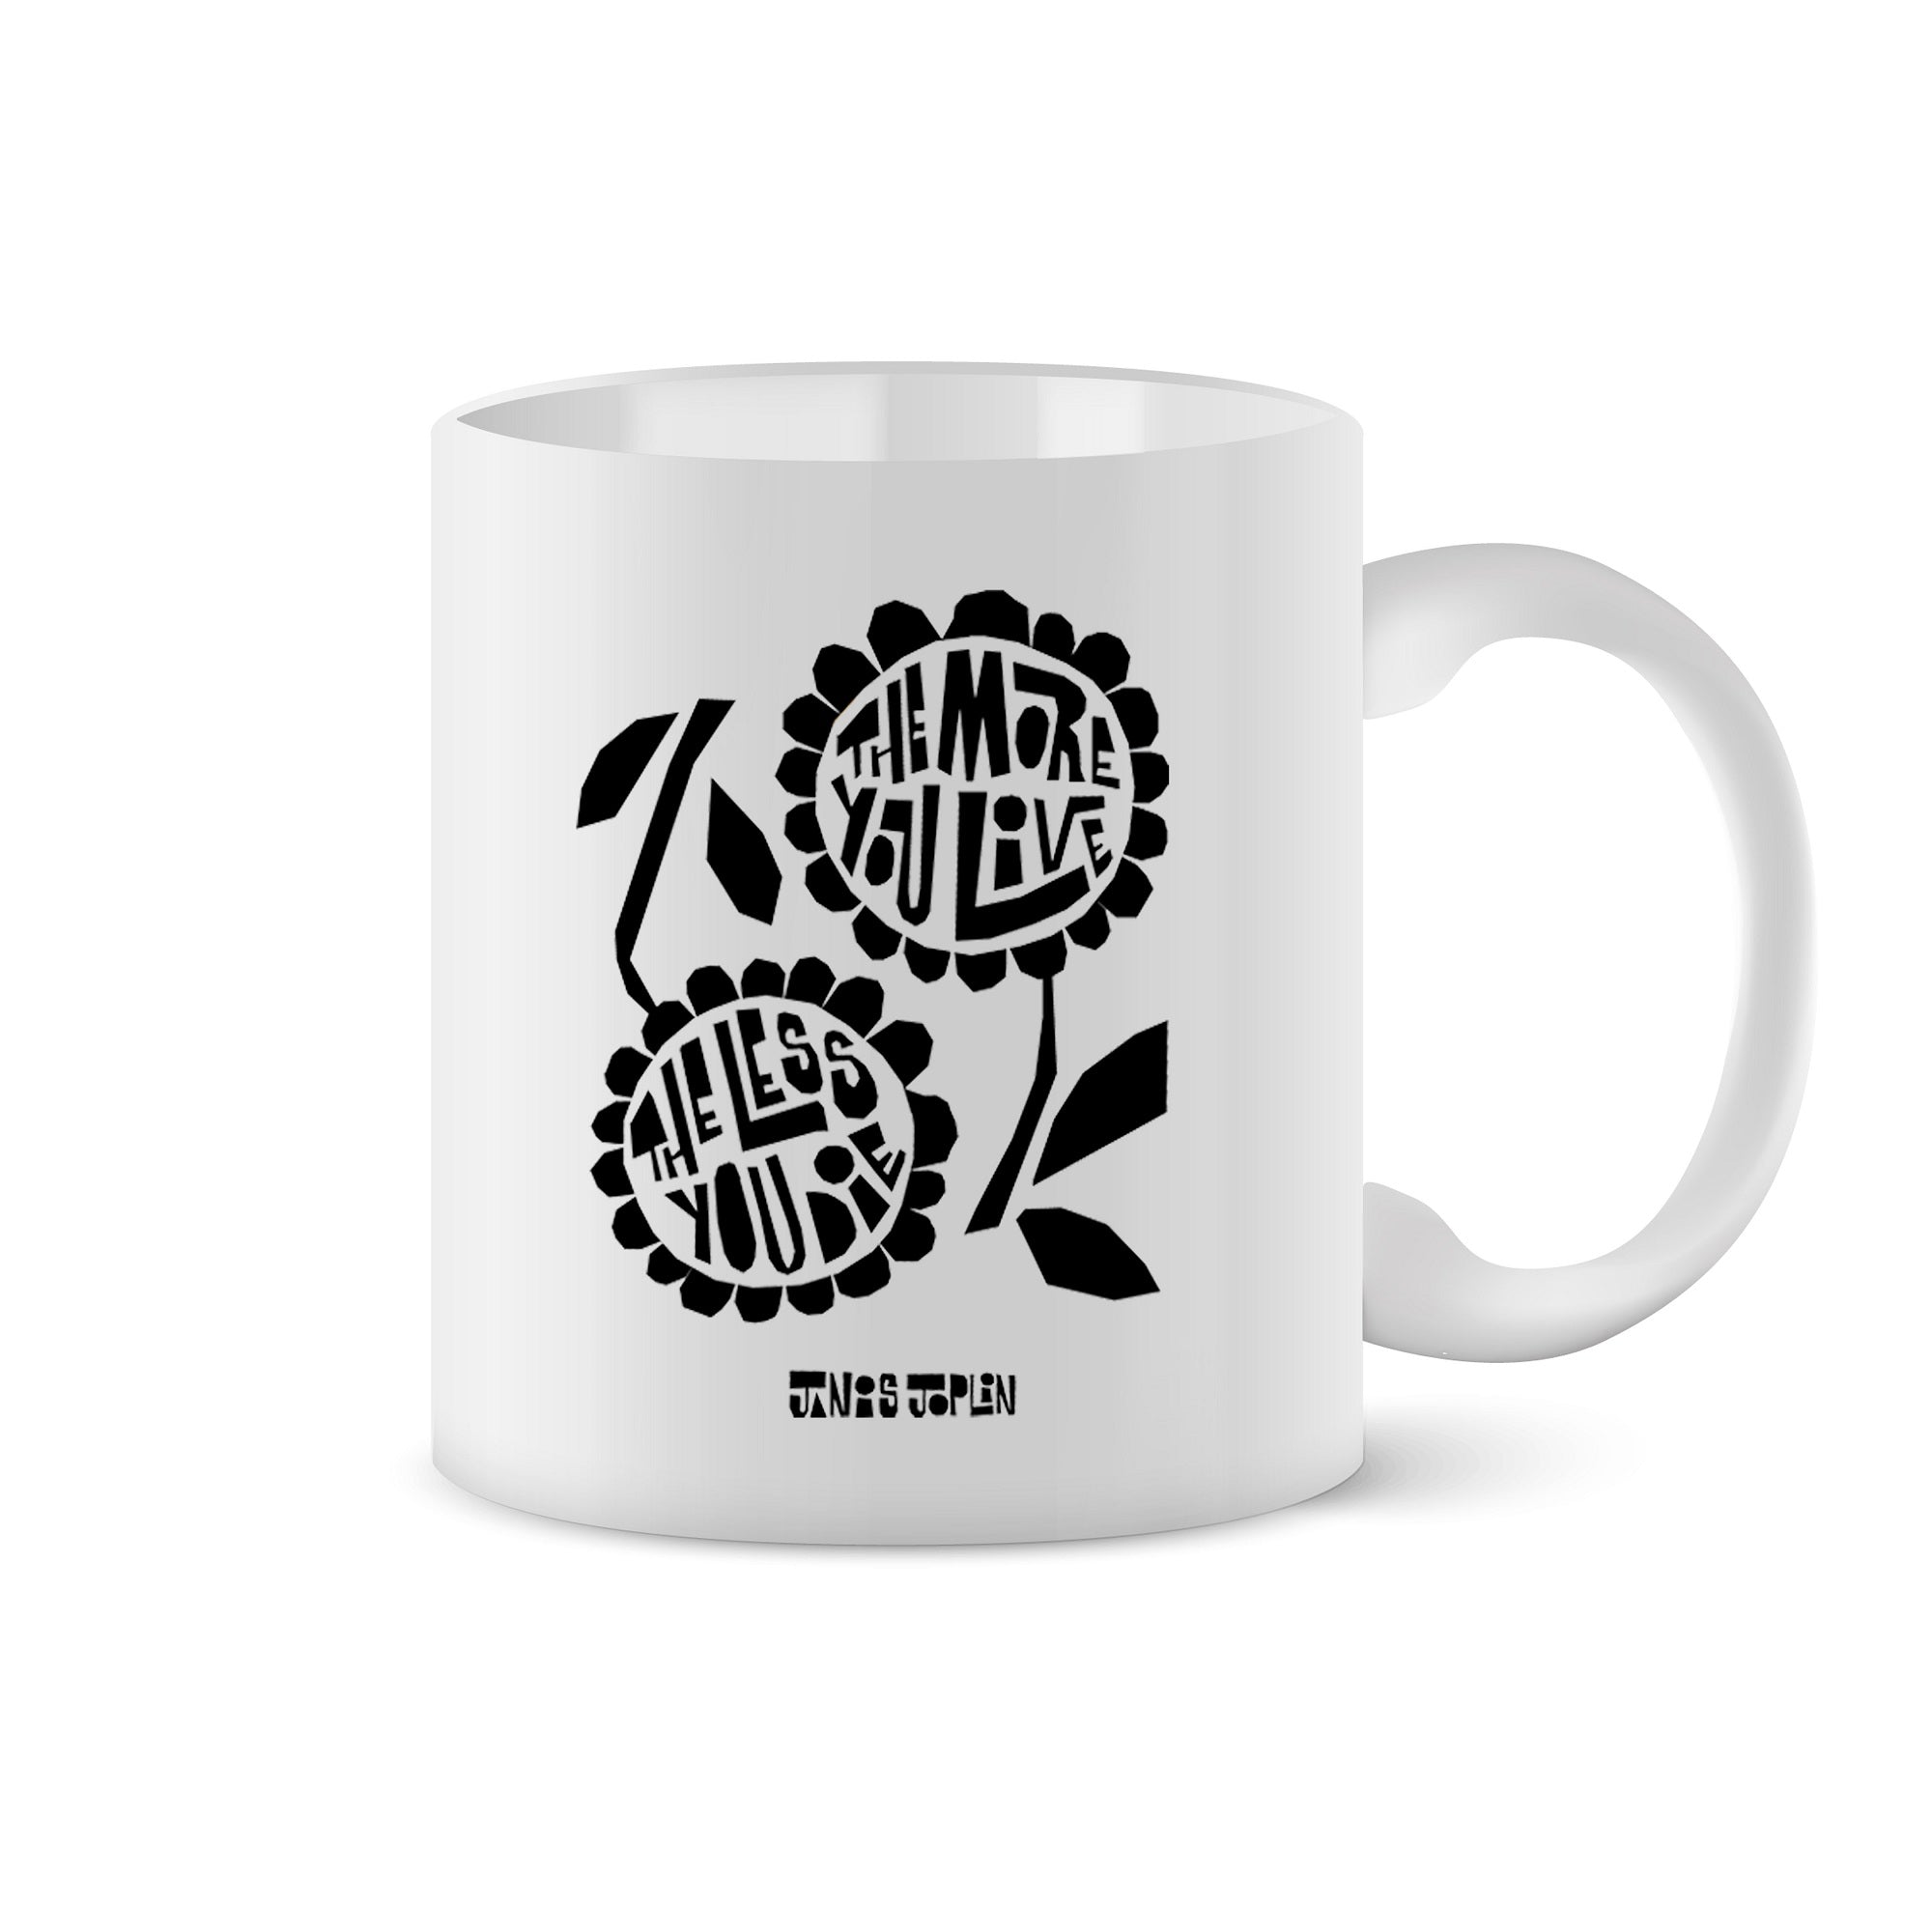 'The More You Live, The Less You Die' Mug